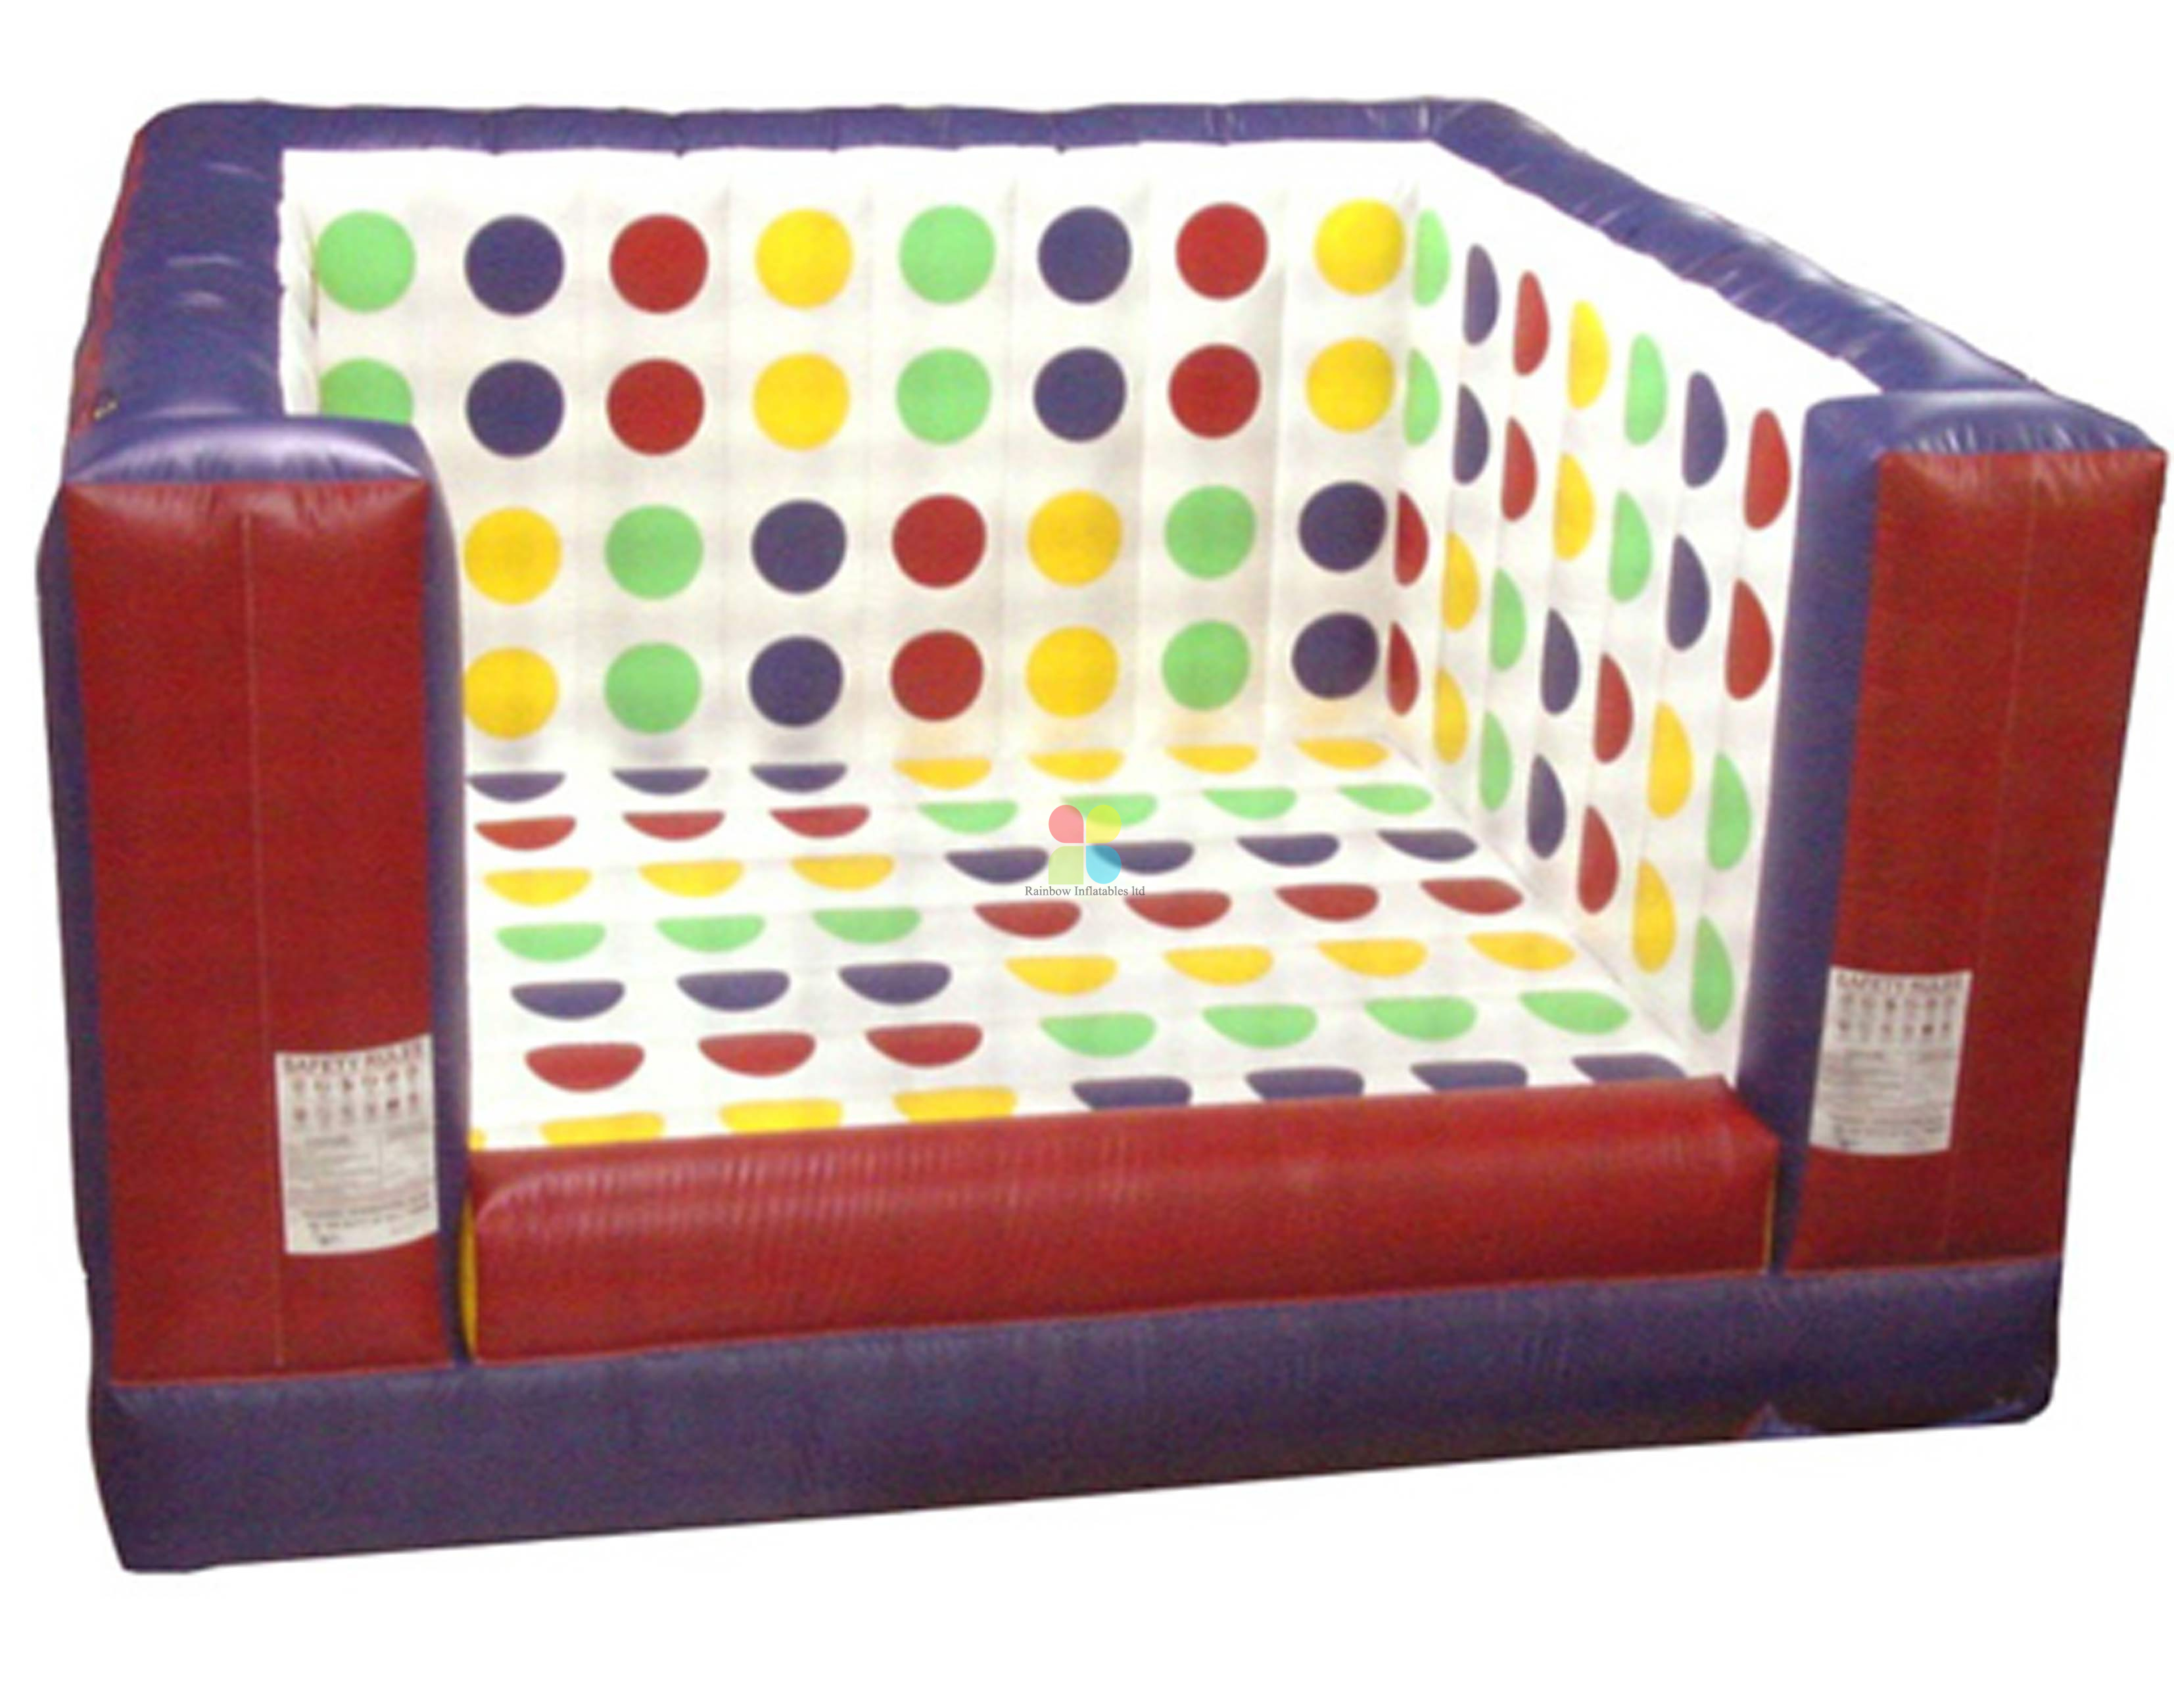 Inflatable Twister Board Inflatable Twister Game for Church Event Family Reunion Team Building